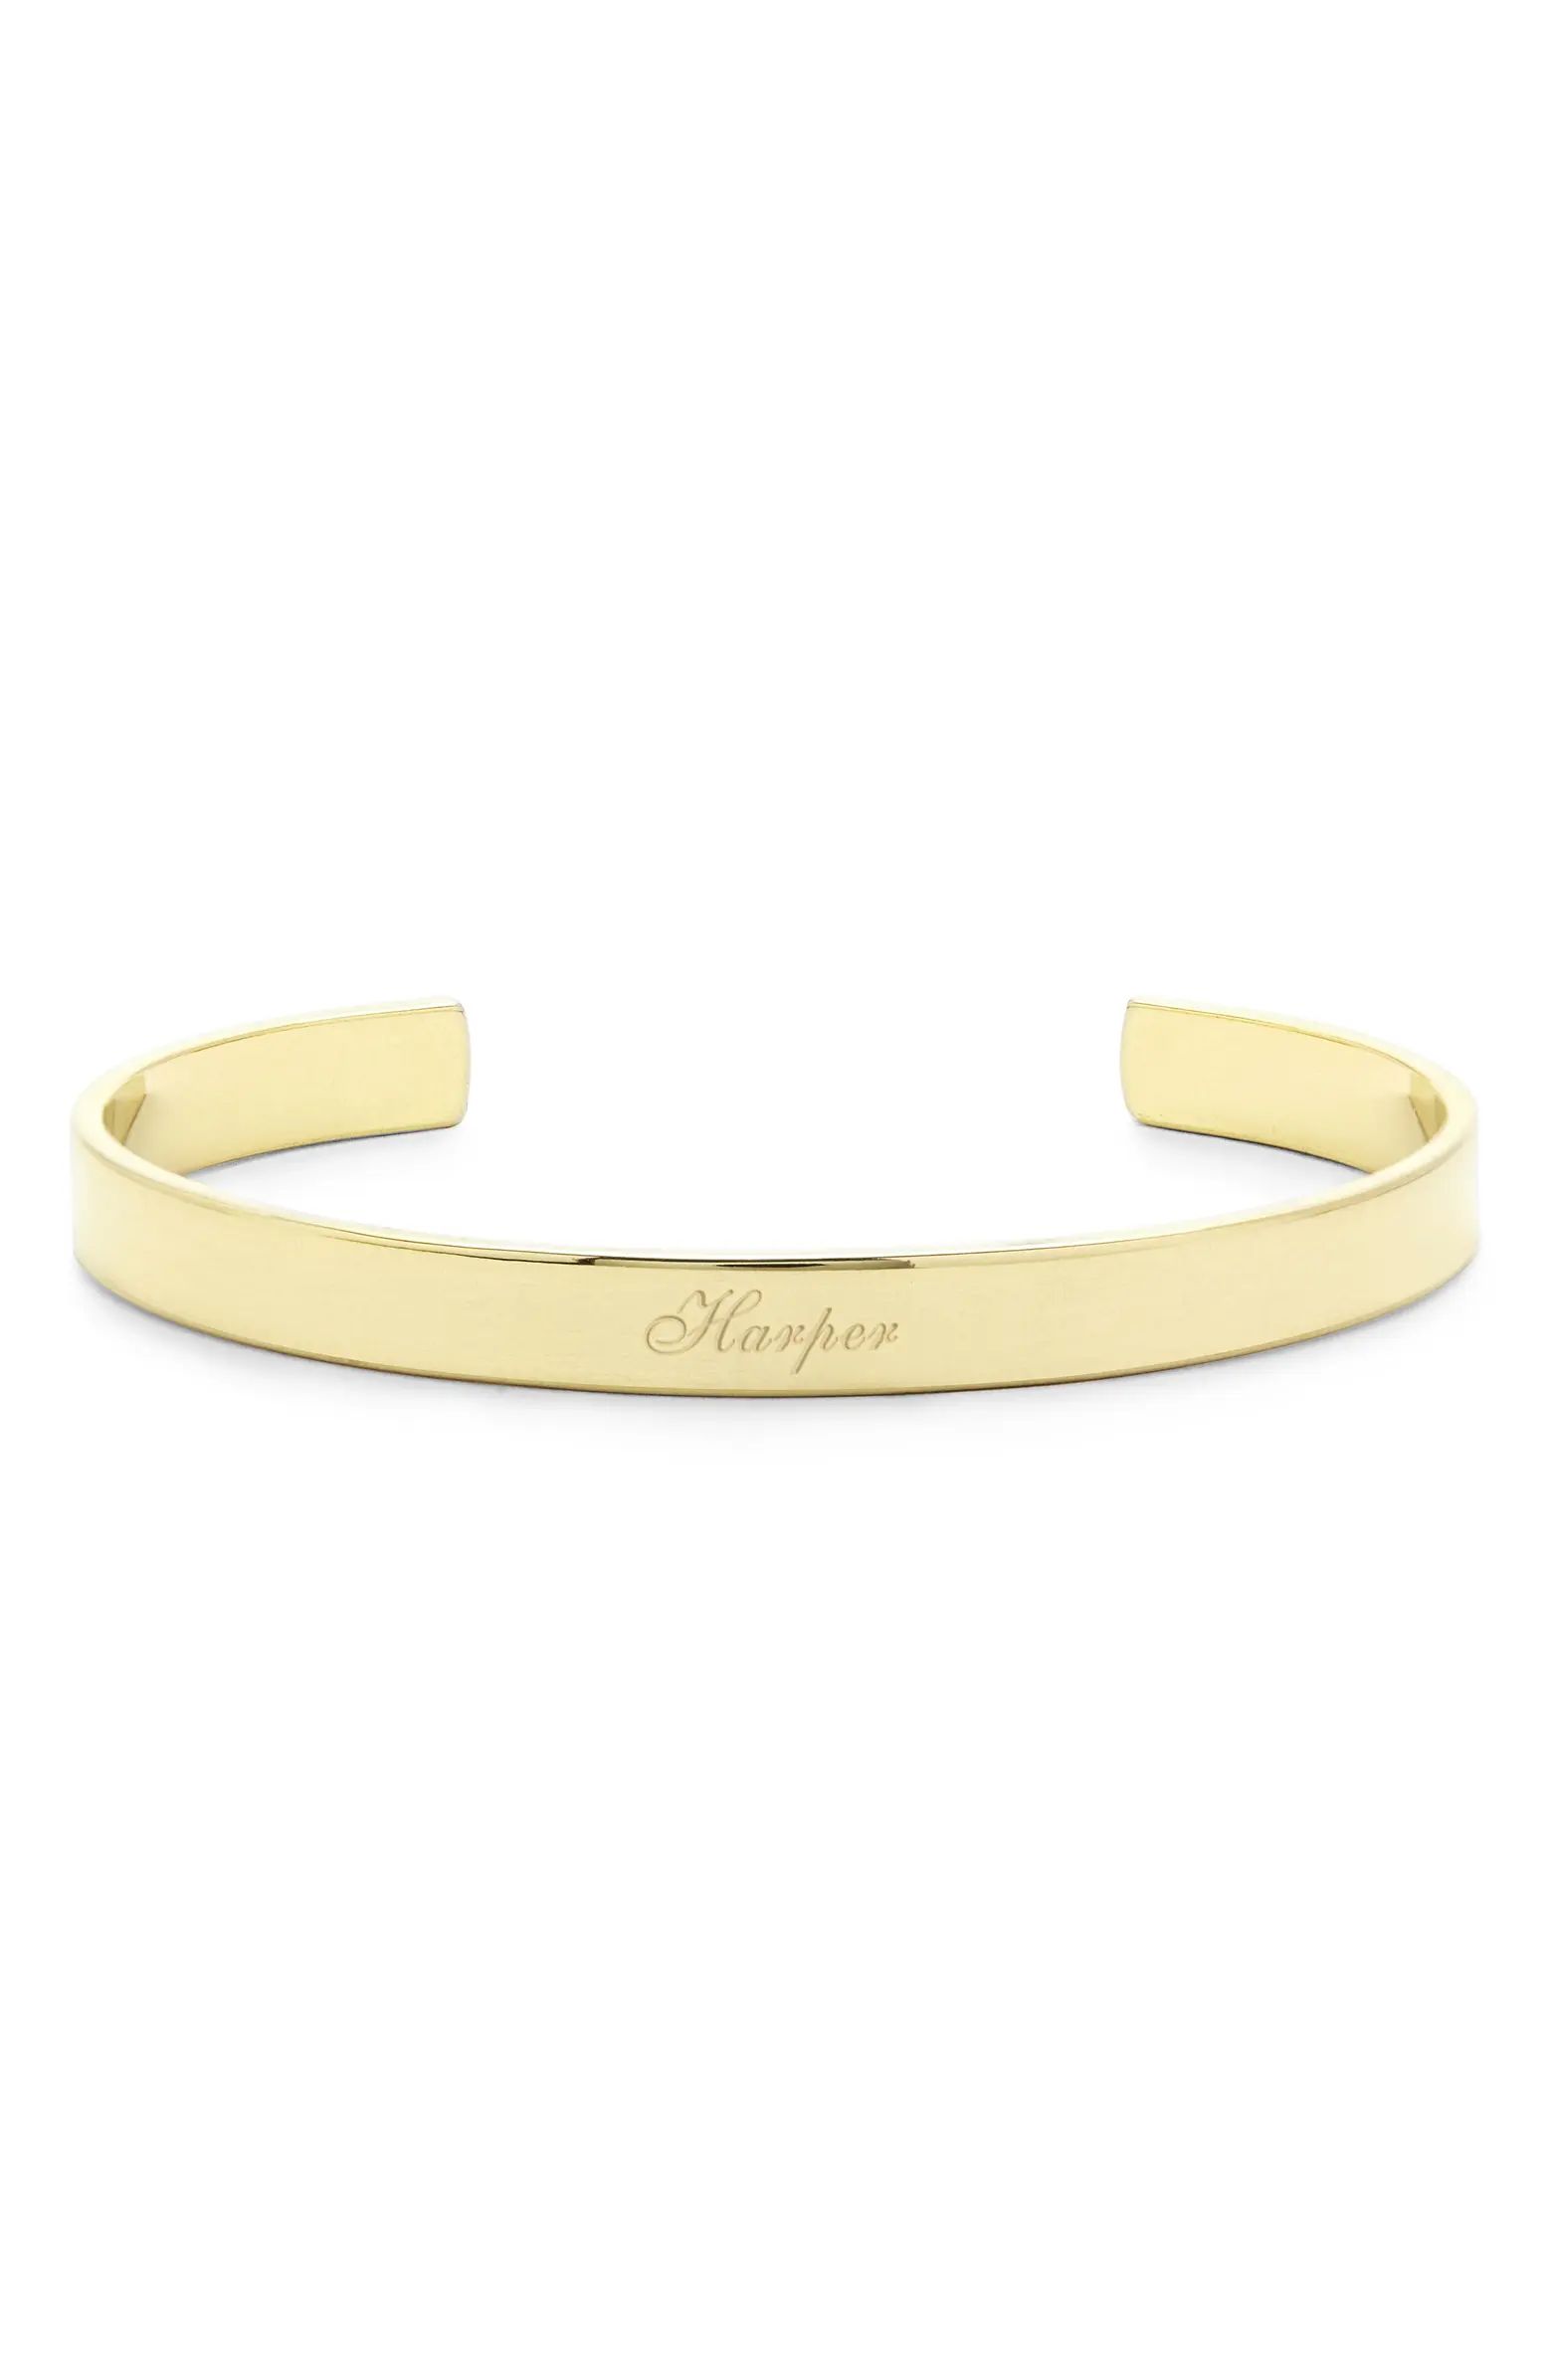 Personalized Name Cuff | Nordstrom